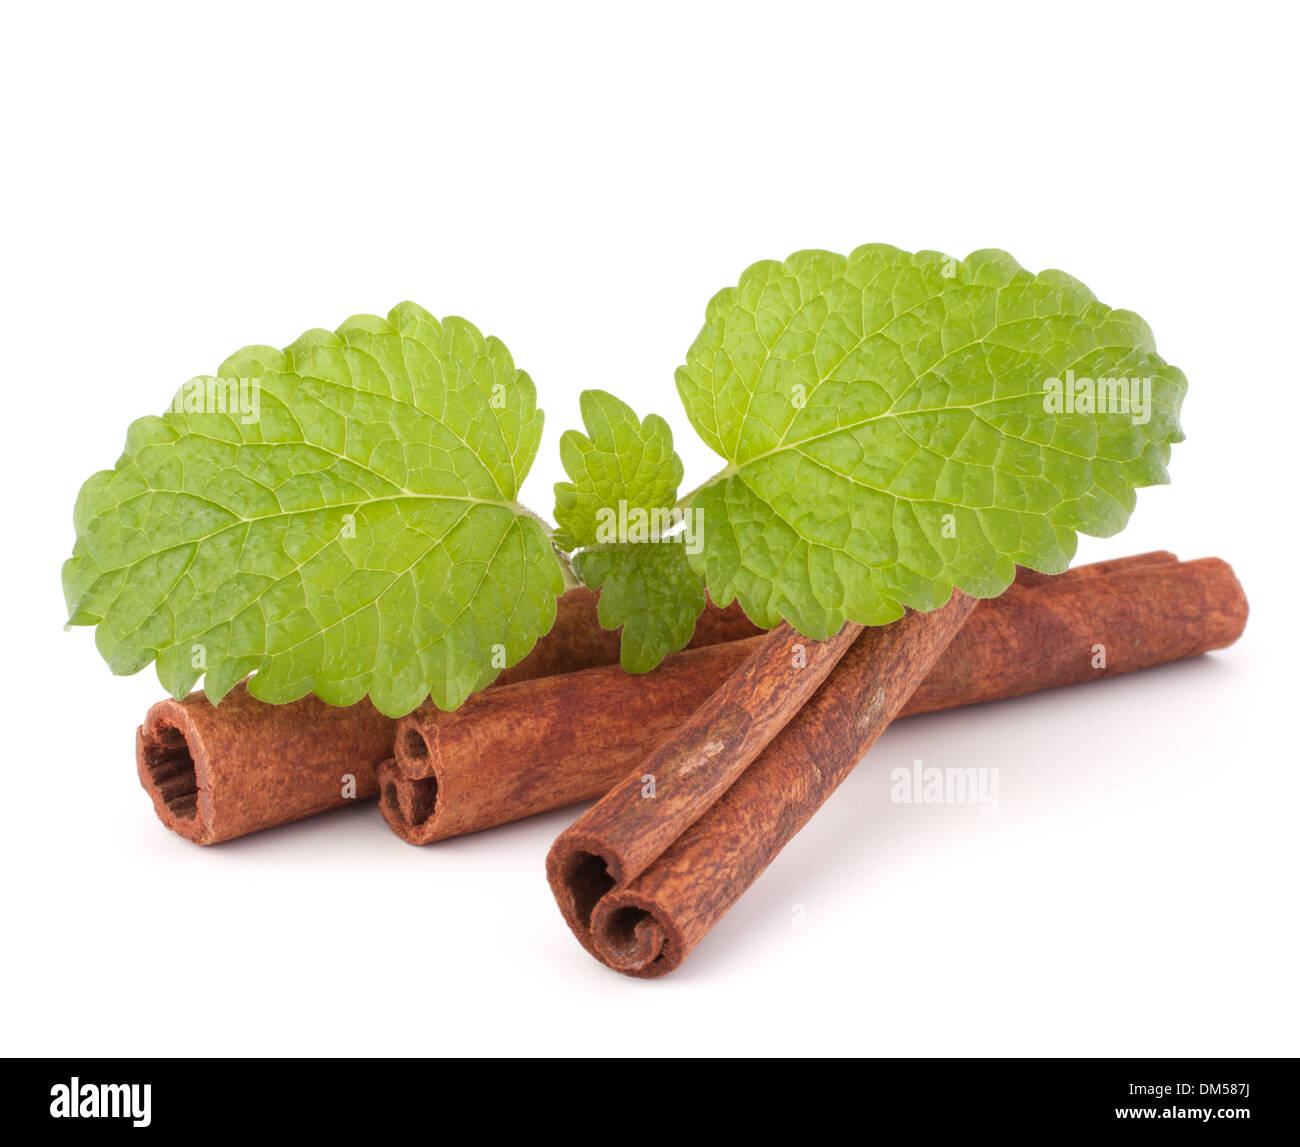 Cinnamon sticks and fresh mint leaf isolated on white background Stock Photo